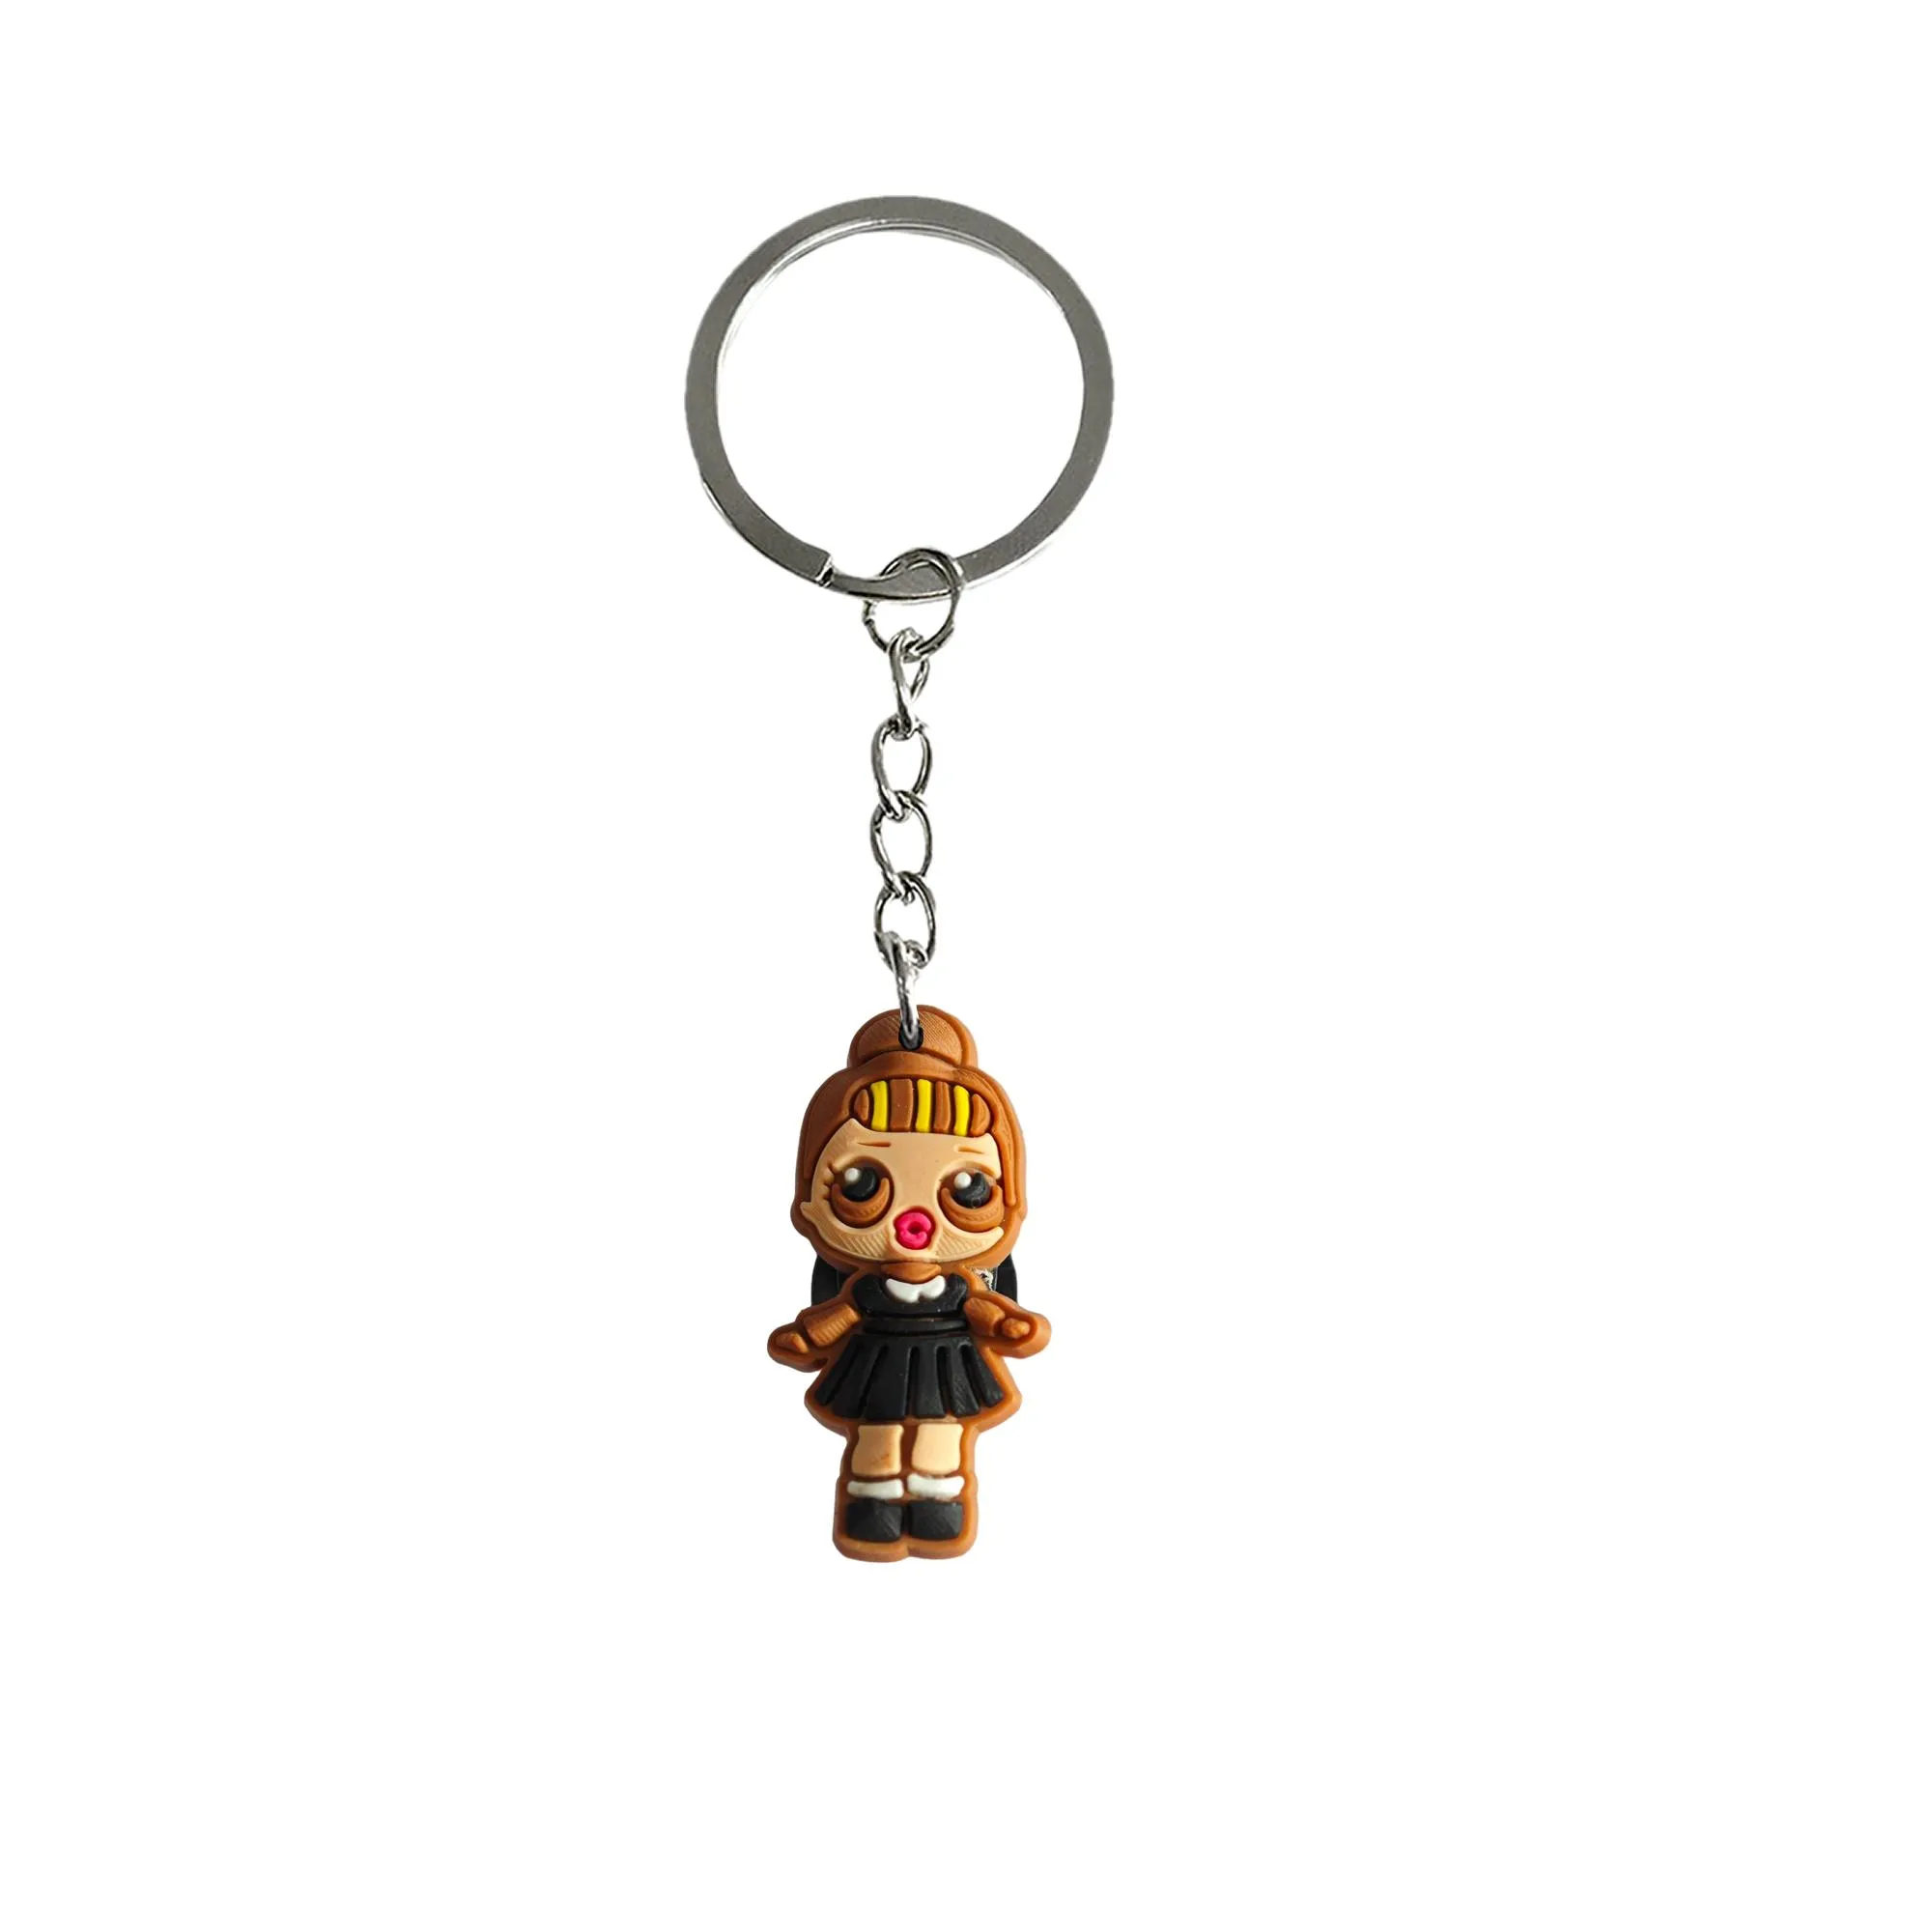 surprise doll keychain cute silicone key chain for adult gift pendant accessories bags keychains men keyring suitable schoolbag kids party favors